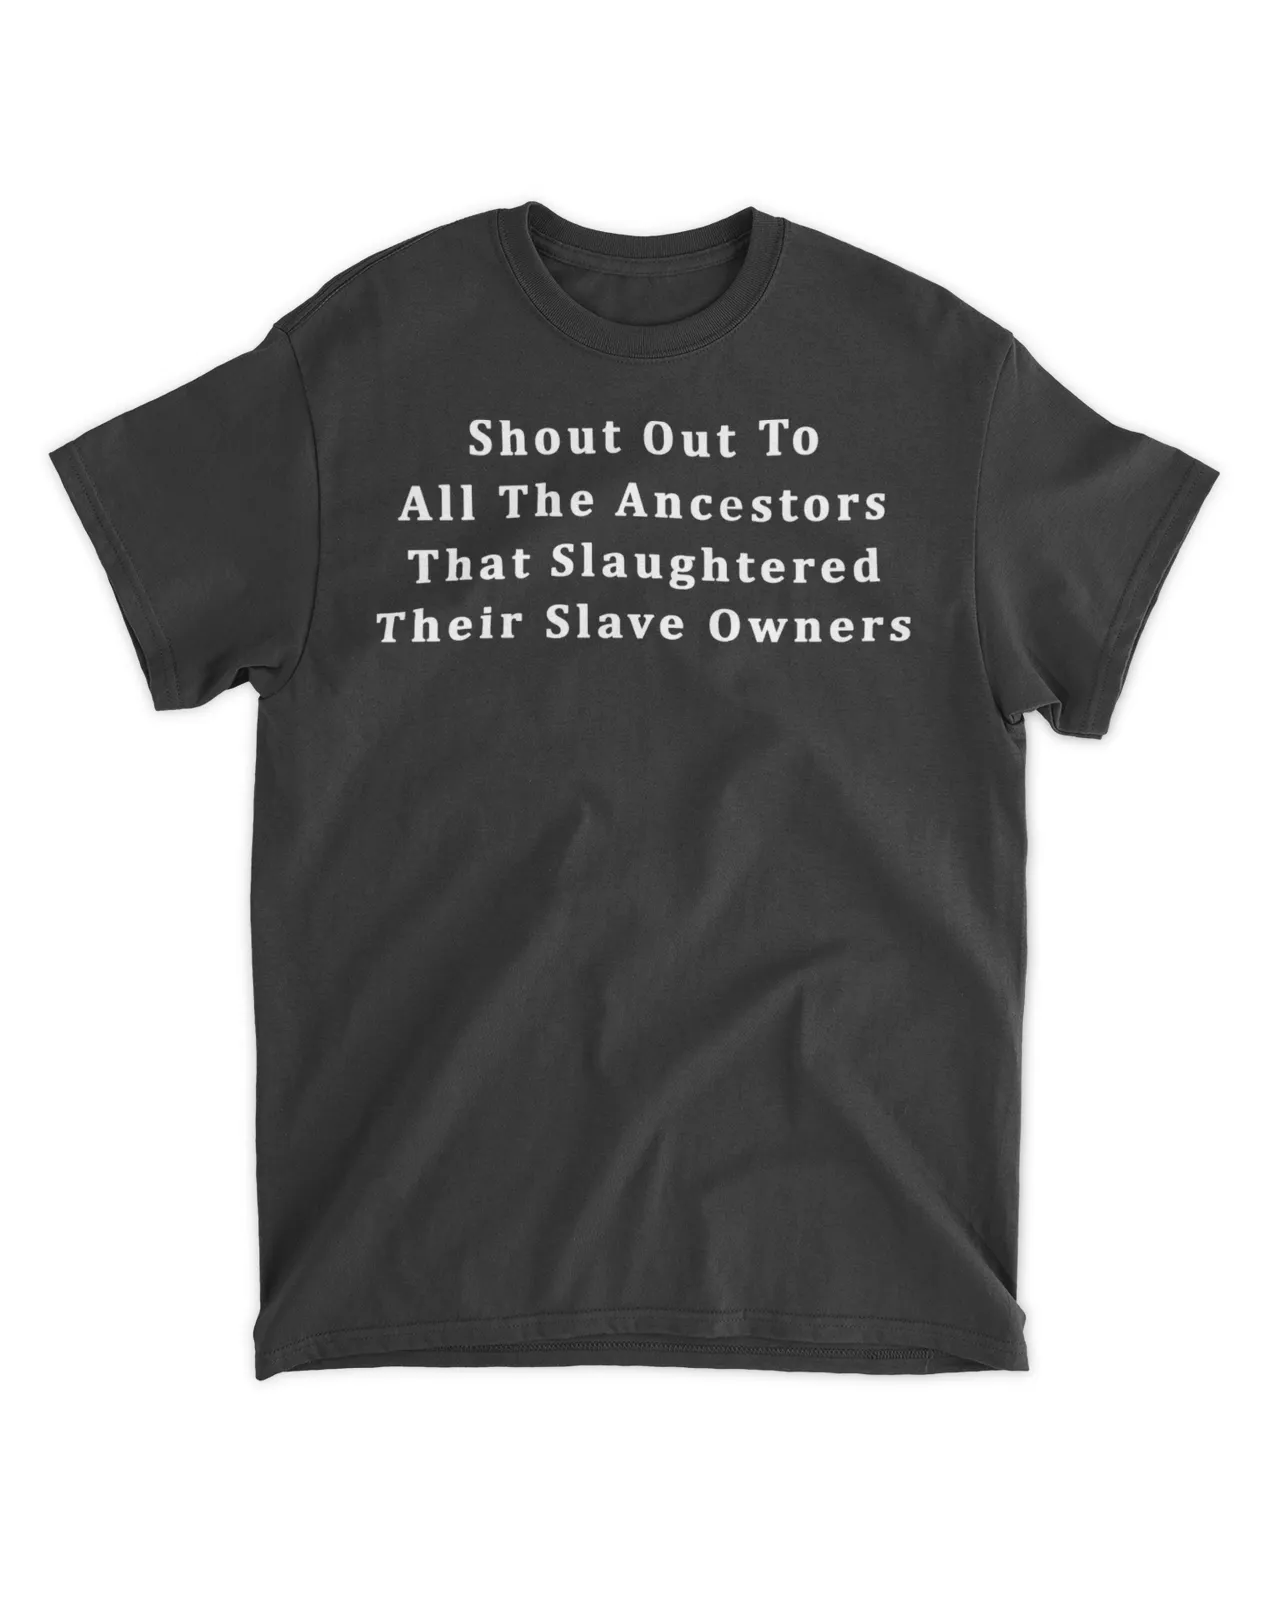  Shout out to all the ancestors that slaughtered their slave owners shirt